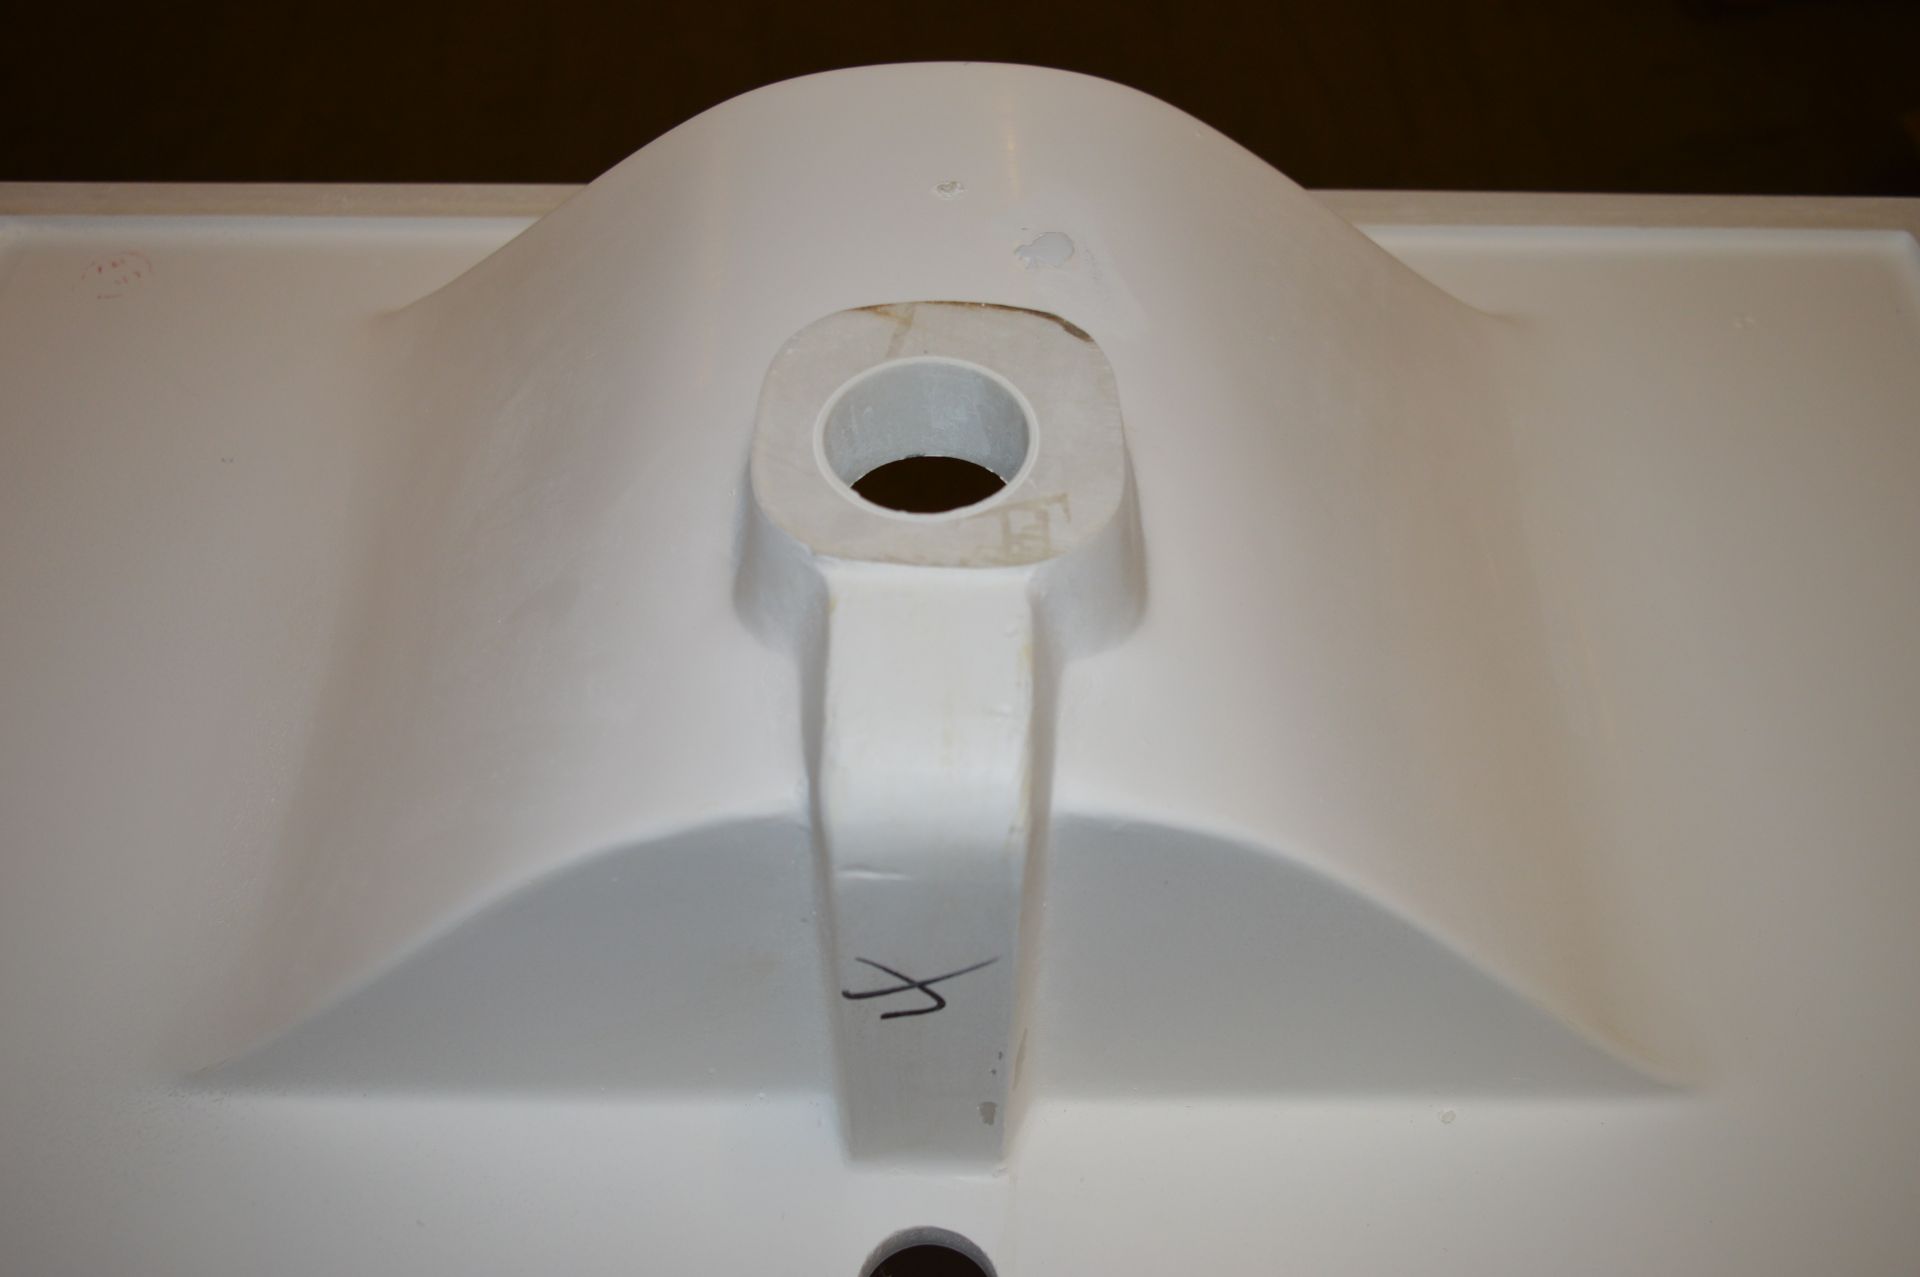 1 x Vogue Onyx White Gloss 600mm Bathroom Vanity Unit With Wash Basin - Vinyl Wrap Coating for - Image 7 of 11